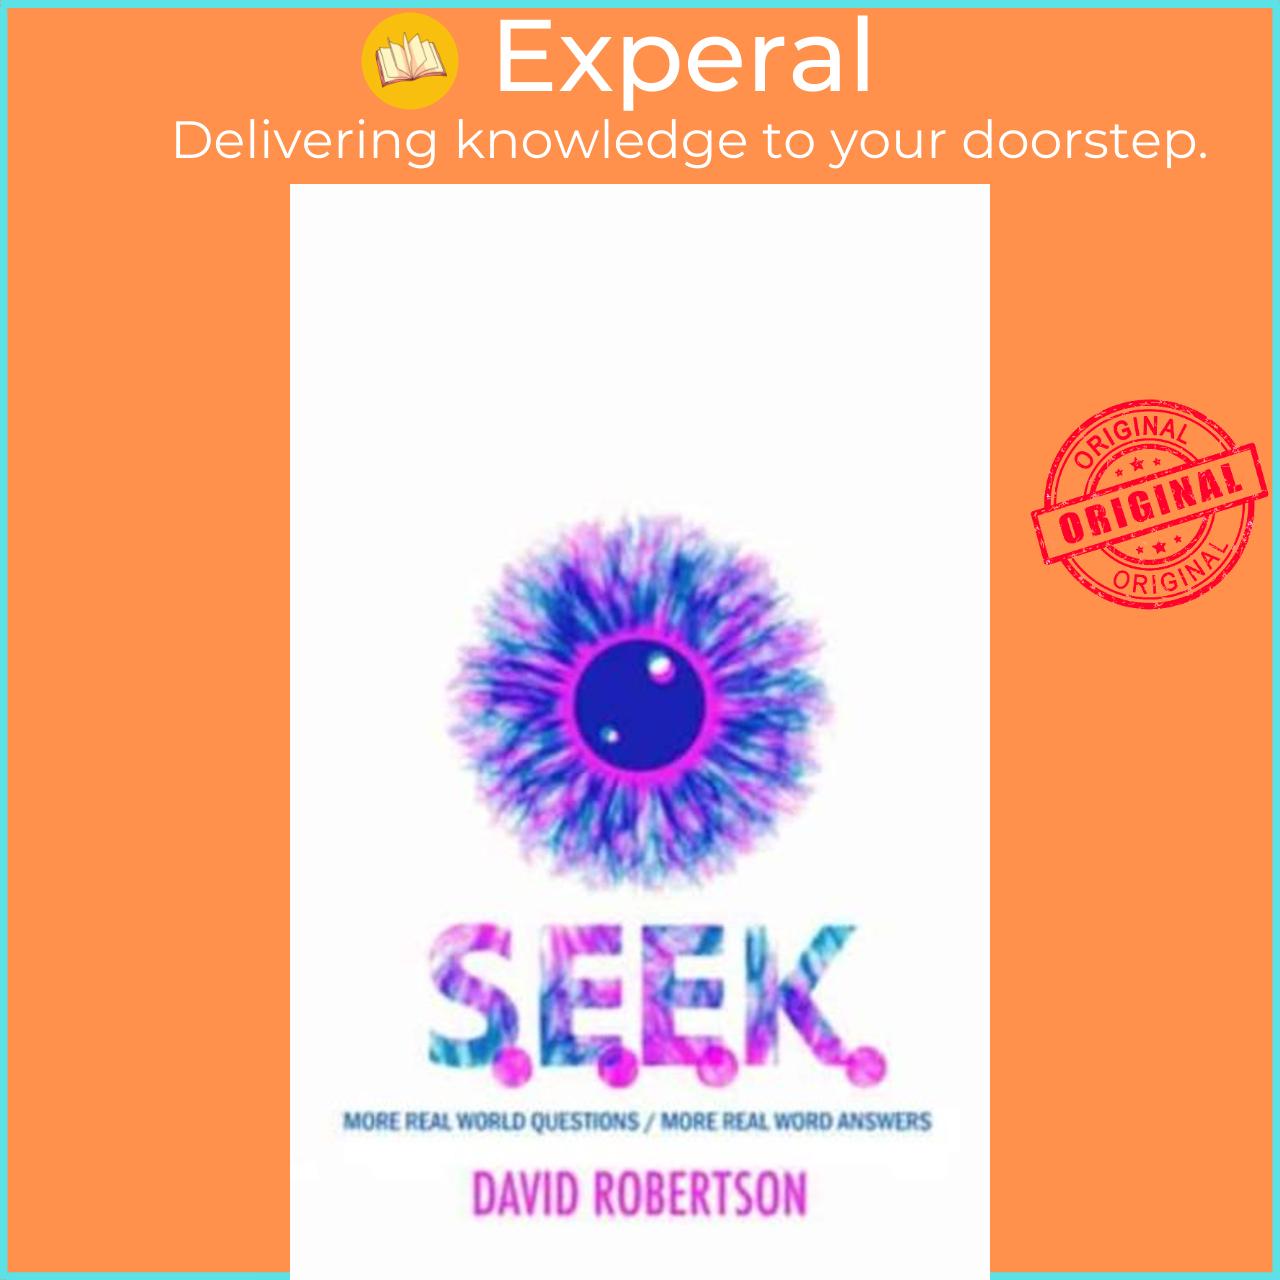 Sách - S.E.E.K. - More Real World Questions / More Real Word Answers by David Robertson (UK edition, hardcover)